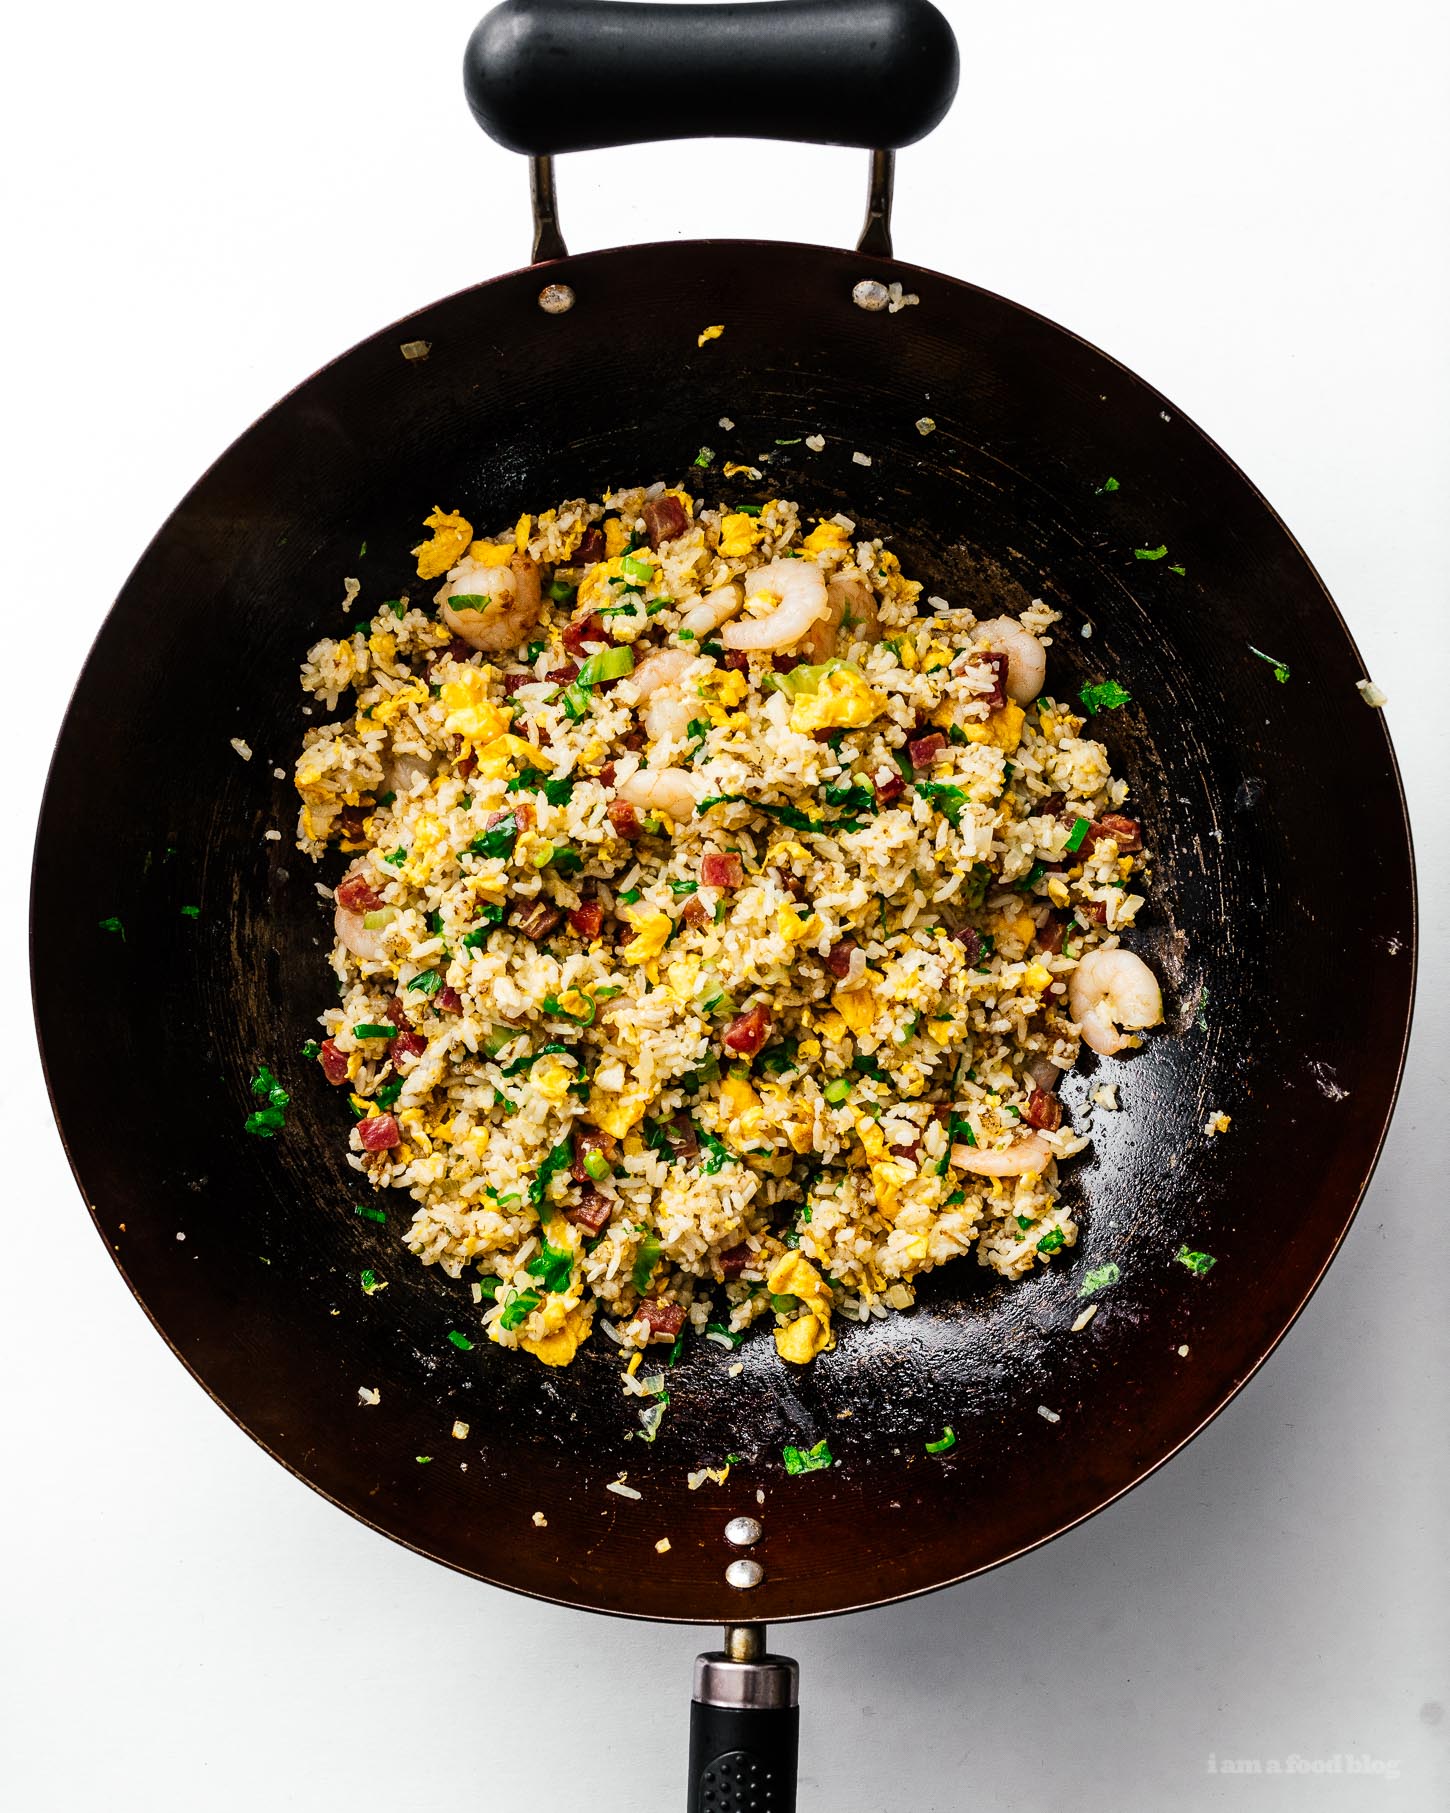 No matter what you call it: yang chow fried rice, young chow fried rice, yeung chow fried rice, or Yangzhou fried rice - there’s no denying that Chinese egg fried rice is delicious. This yang chow fried rice recipe will having you making better than takeout fried rice at home in no time flat. #friedrice #friedricerecipe #chinesefood #recipes #dinner #rice #takeout #betterthantakeout